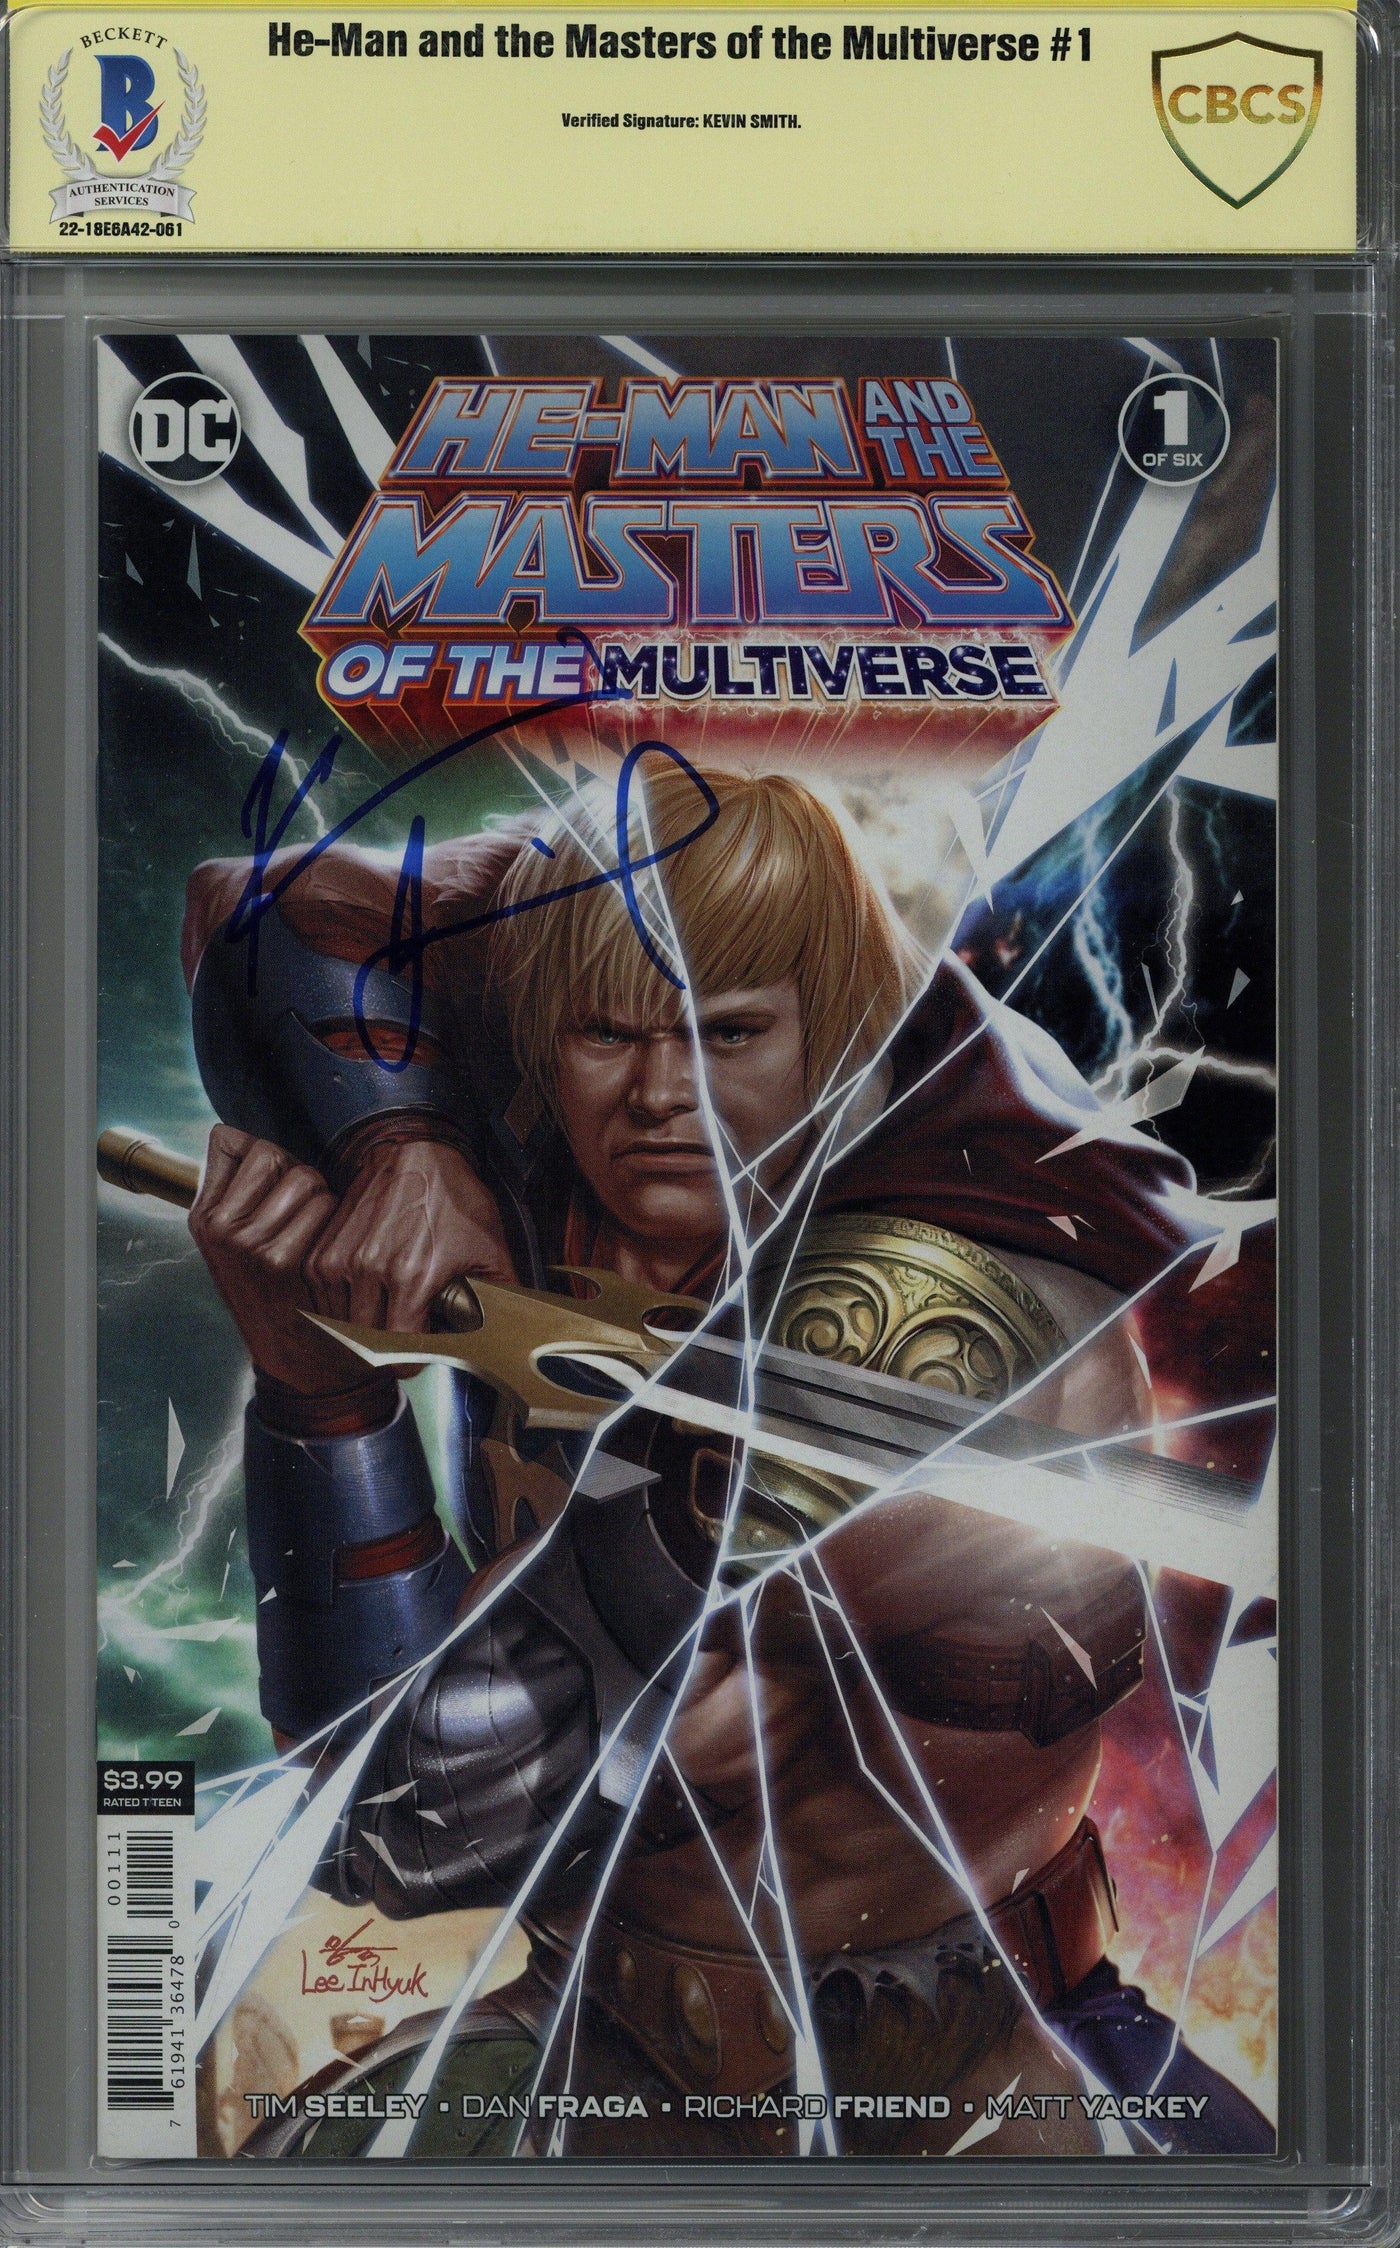 KEVIN SMITH SIGNED HE-MAN AND THE MASTERS OF THE MULTIVERSE #1 CBCS